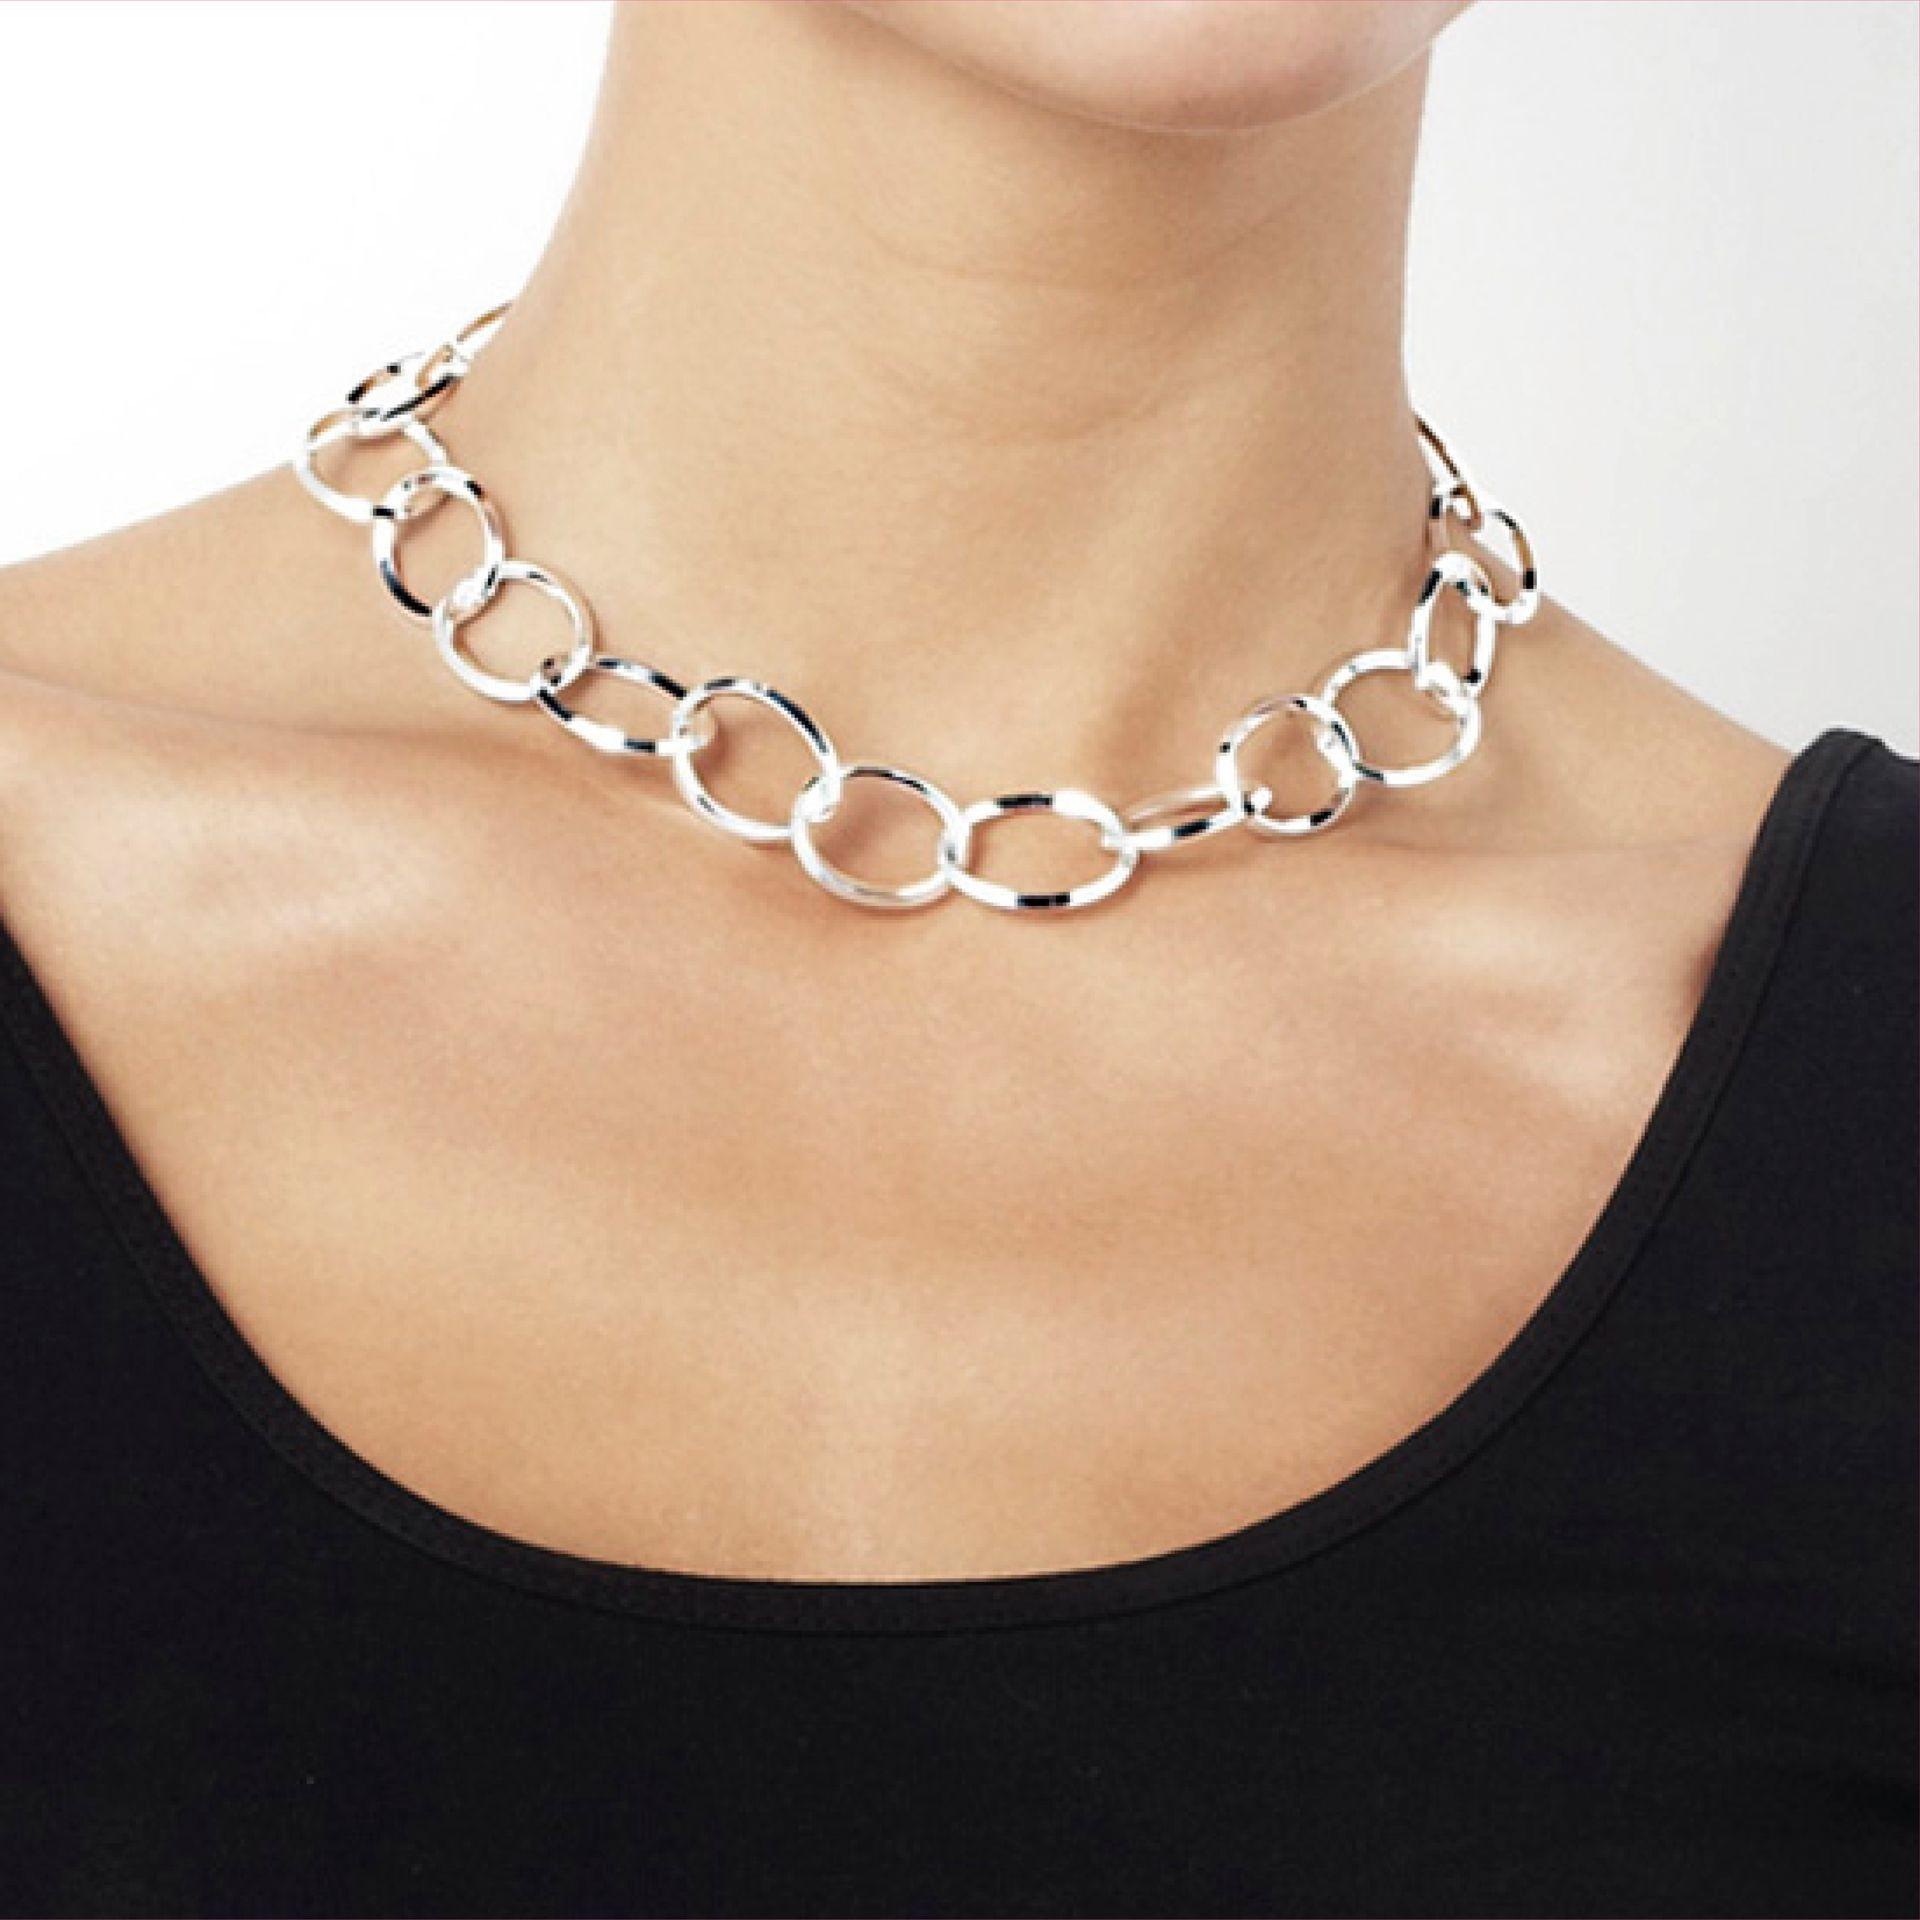 Chain Reaction Necklace. 